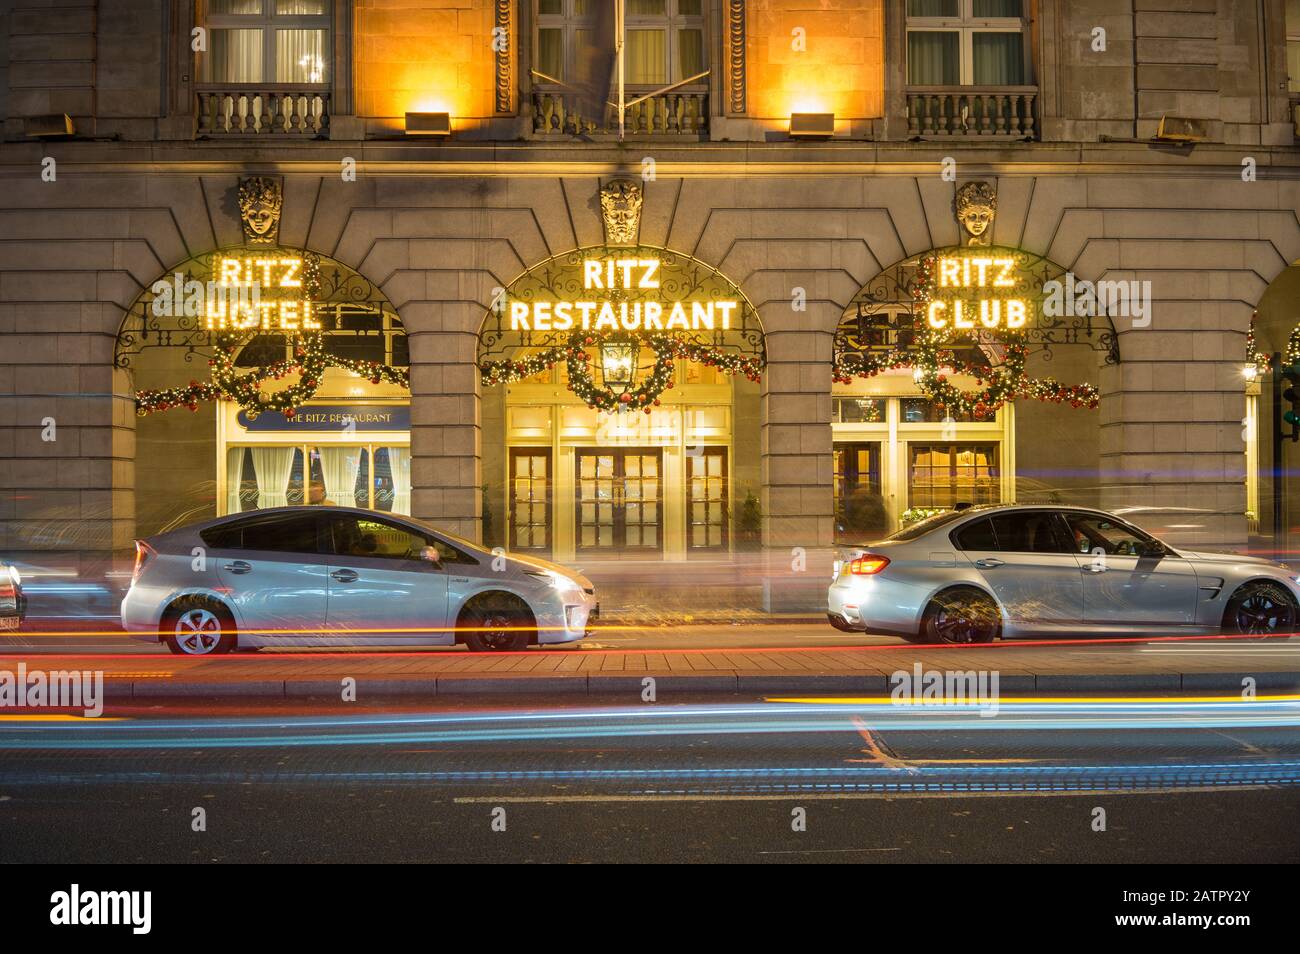 The Ritz Hotel and Restaurant lit up at night with Christmas decorations hanging. Long exposure with the lights of cars passing in front. London Stock Photo